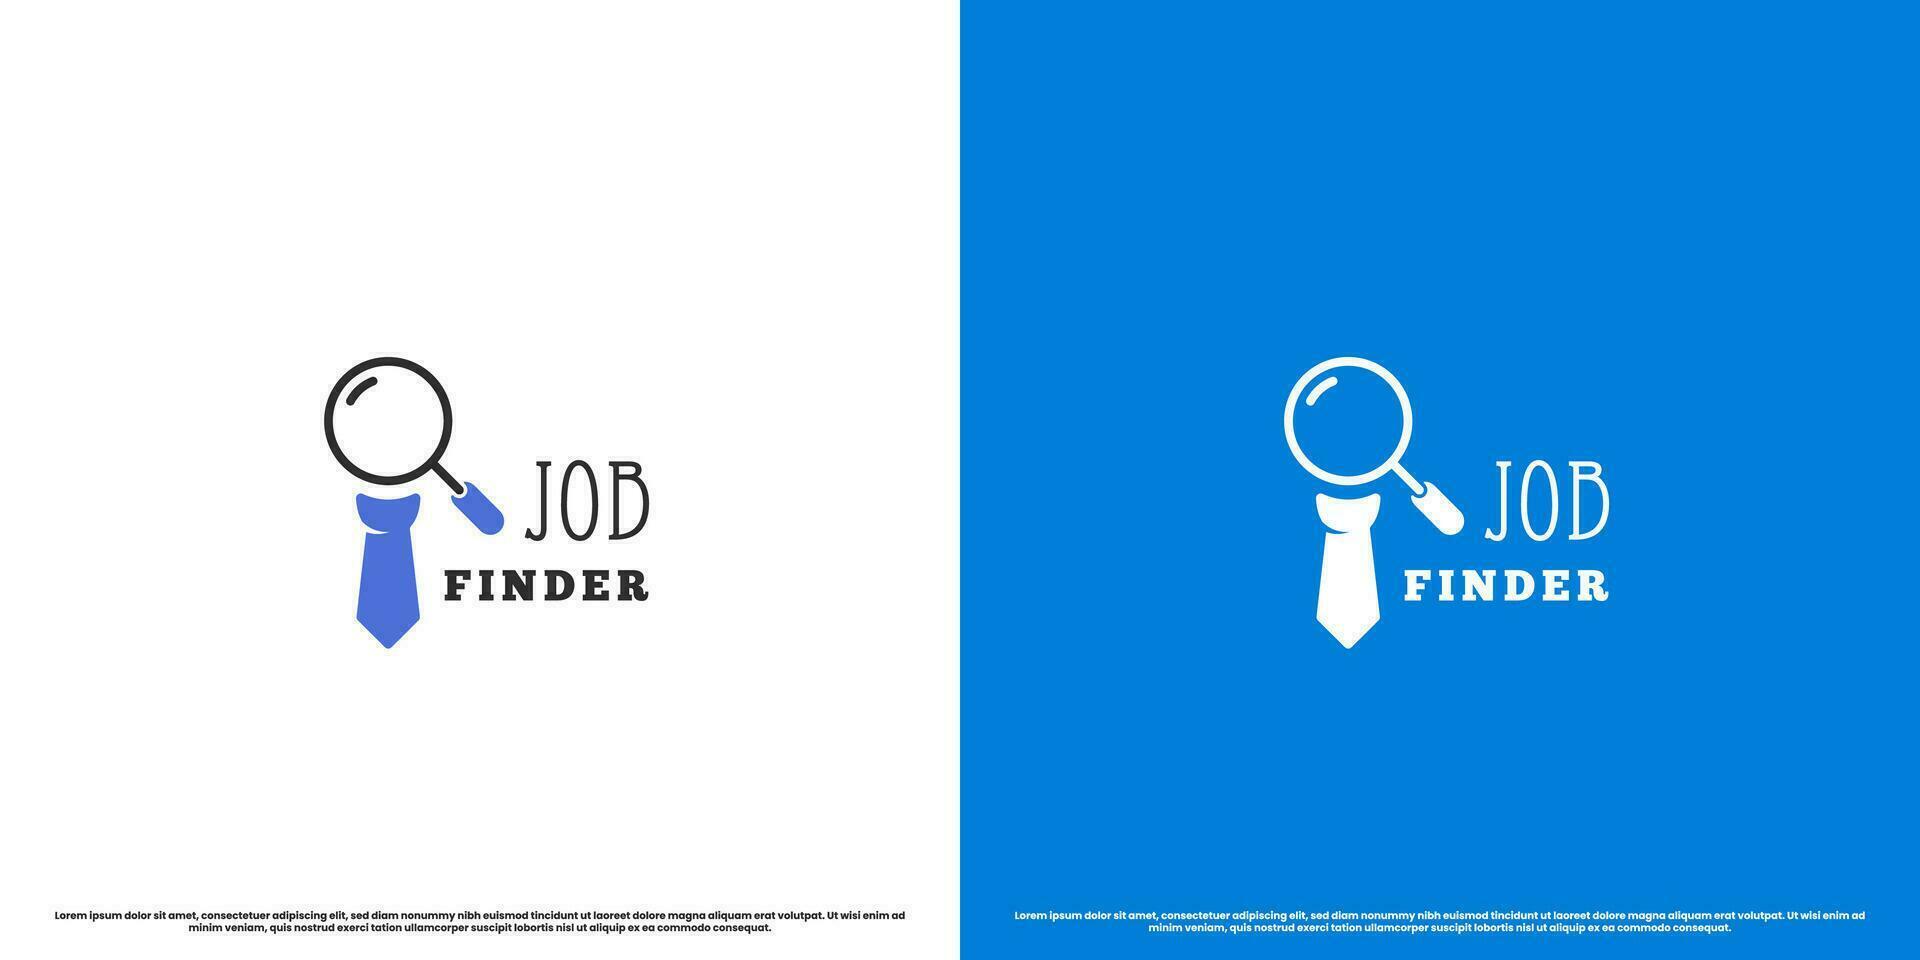 Job finder logo design illustration. Modern minimalist simple flat silhouette of tie and sunglass. Icon symbol looking for recruitment announcement job application office worker company business. vector